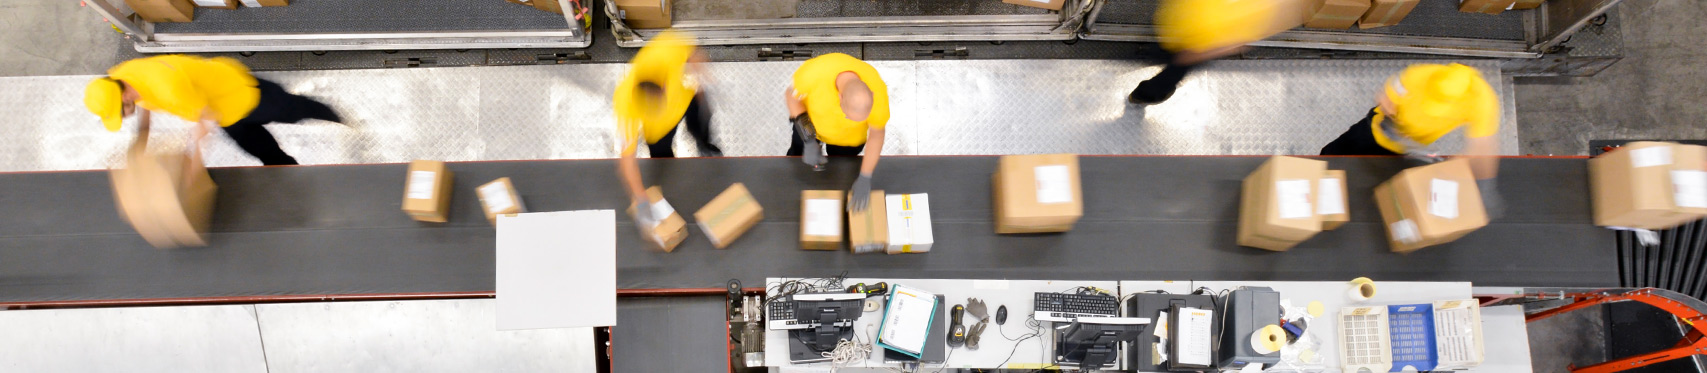 factory workers packing boxes